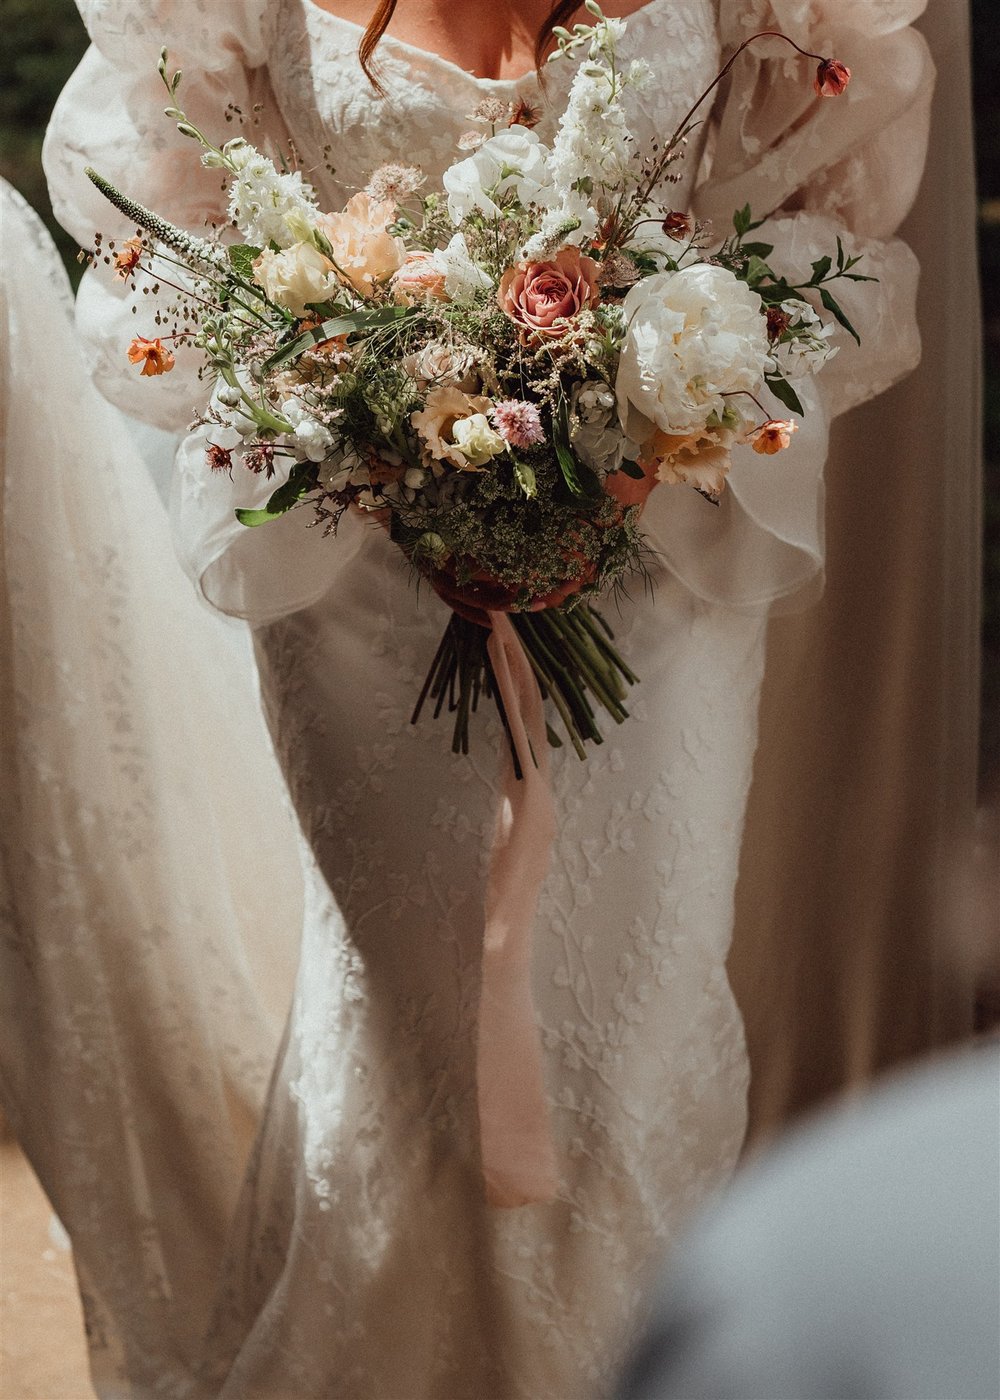 Handtied bridal bouquet with english country garden flowers